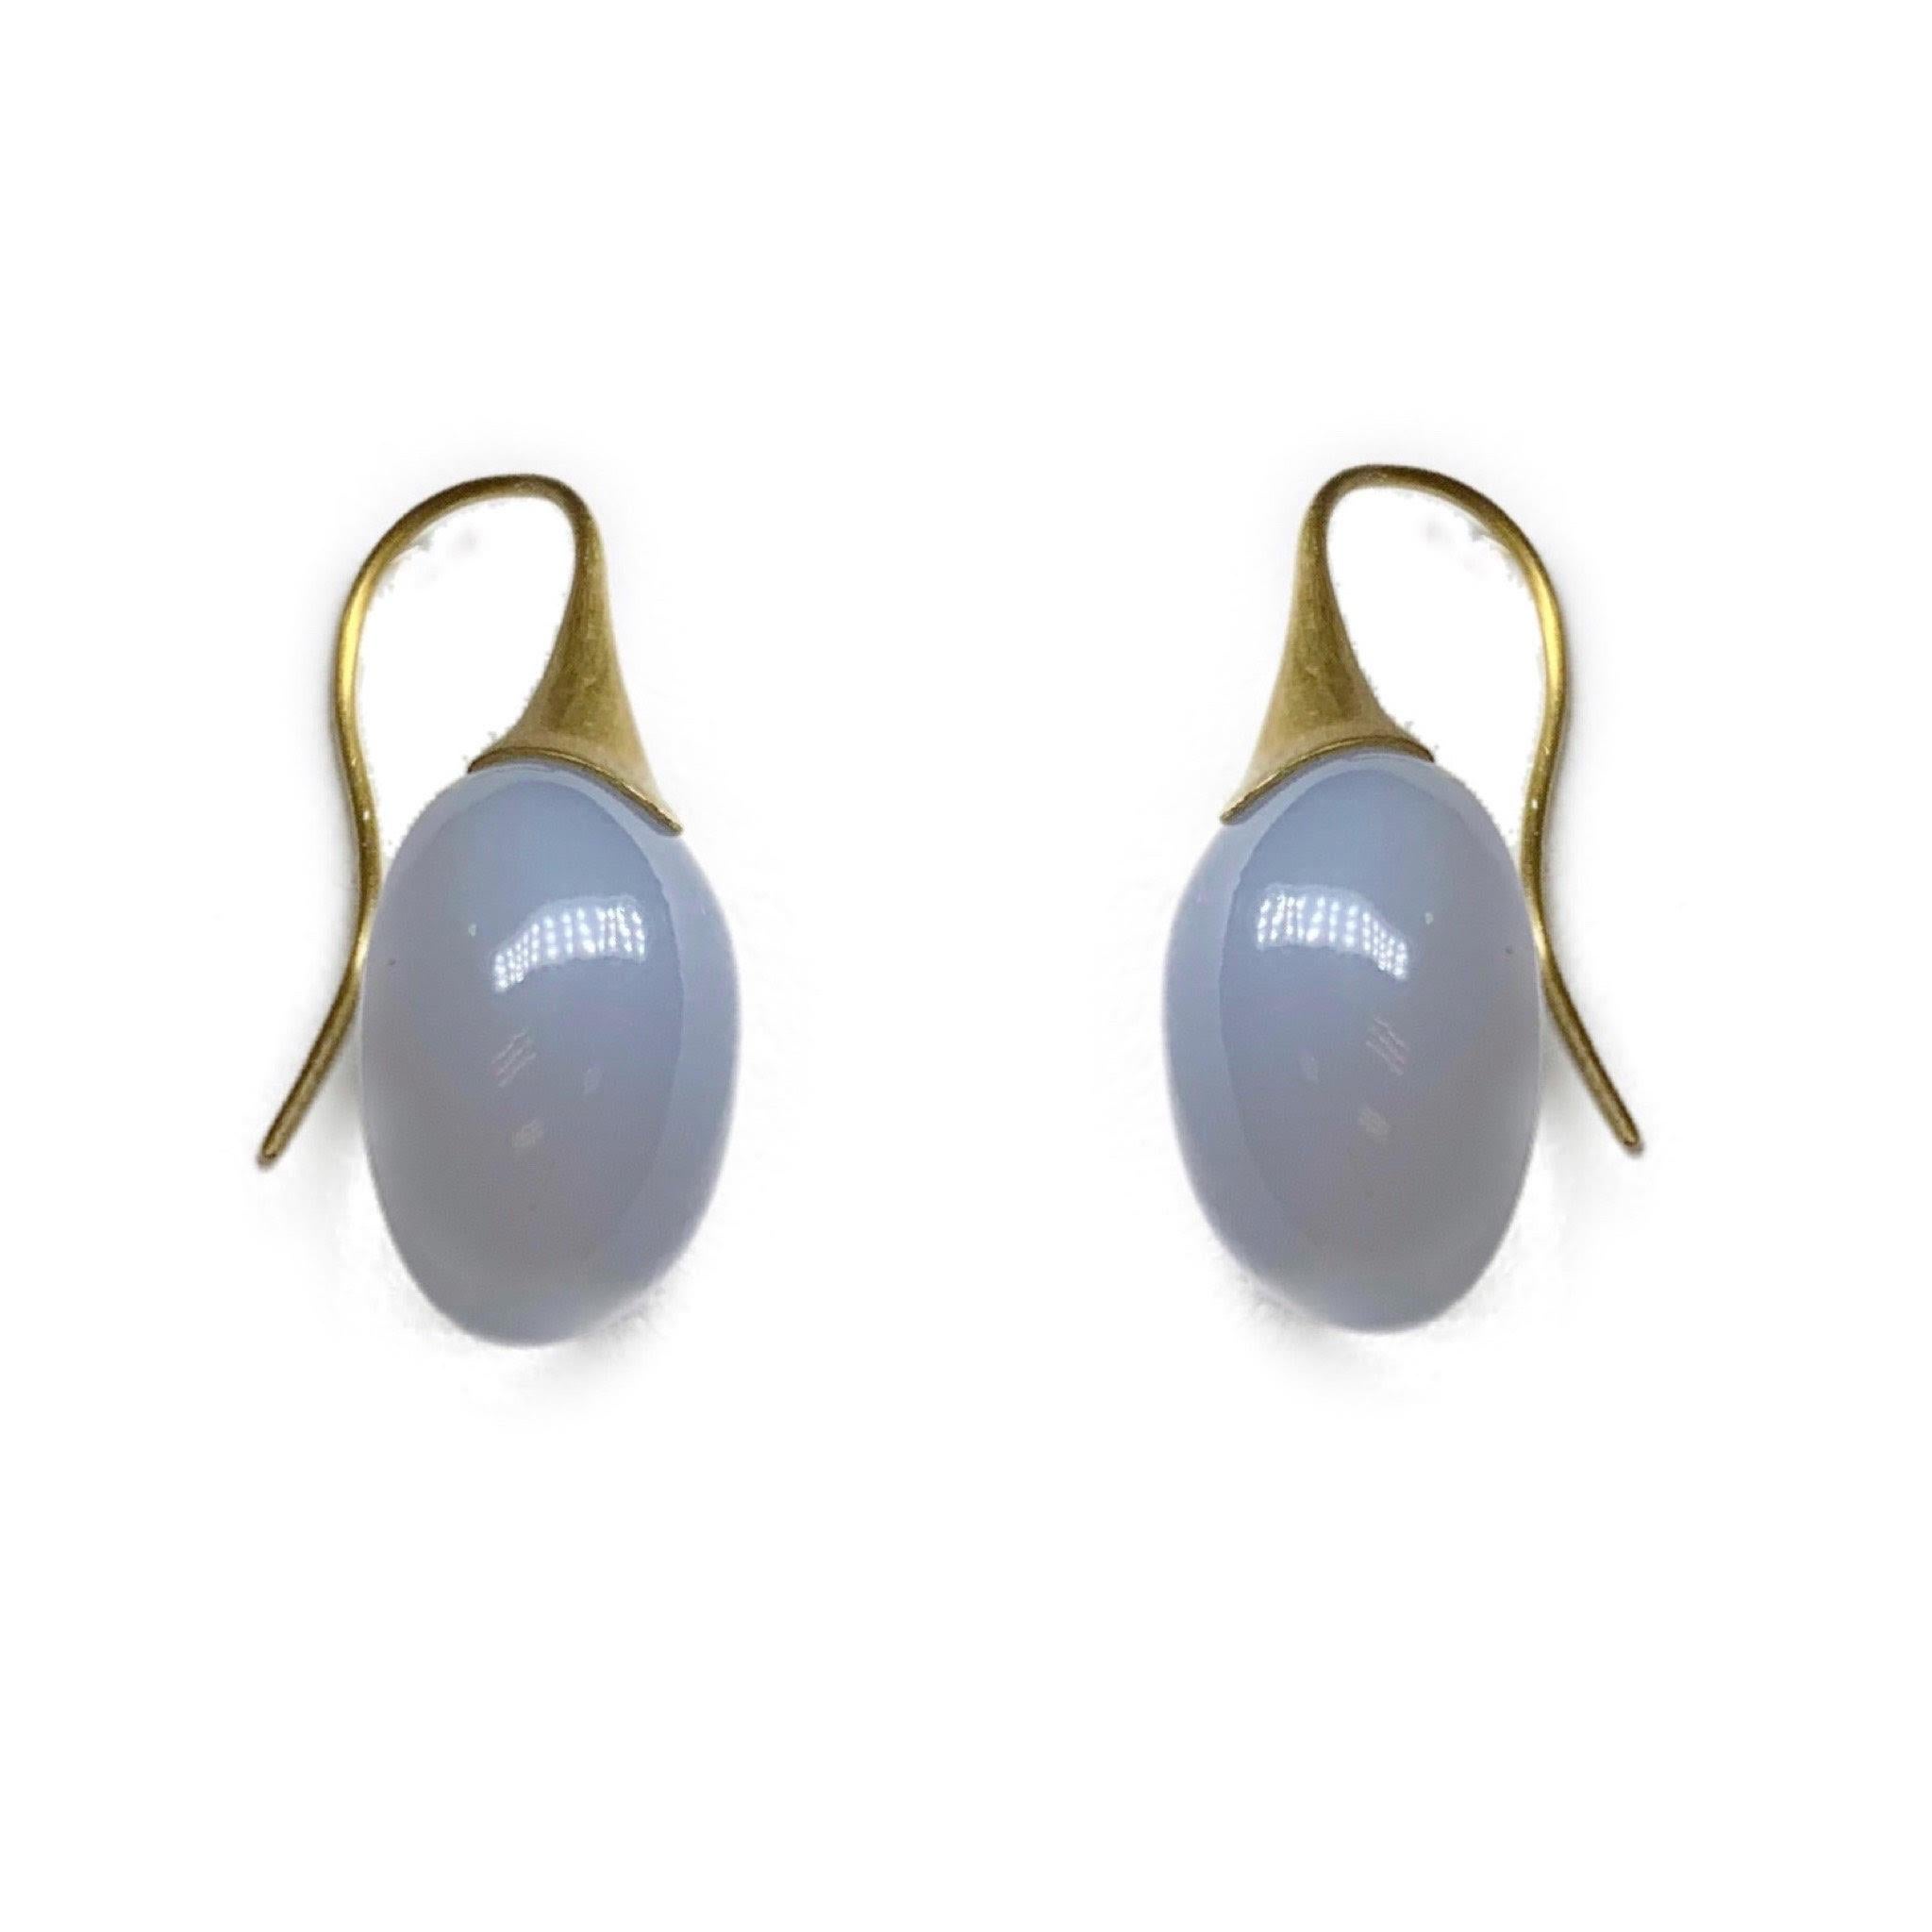 Contemporary Chalcedony on Trumpet Earrings in 18 Karat Gold, A2 by Arunashi For Sale